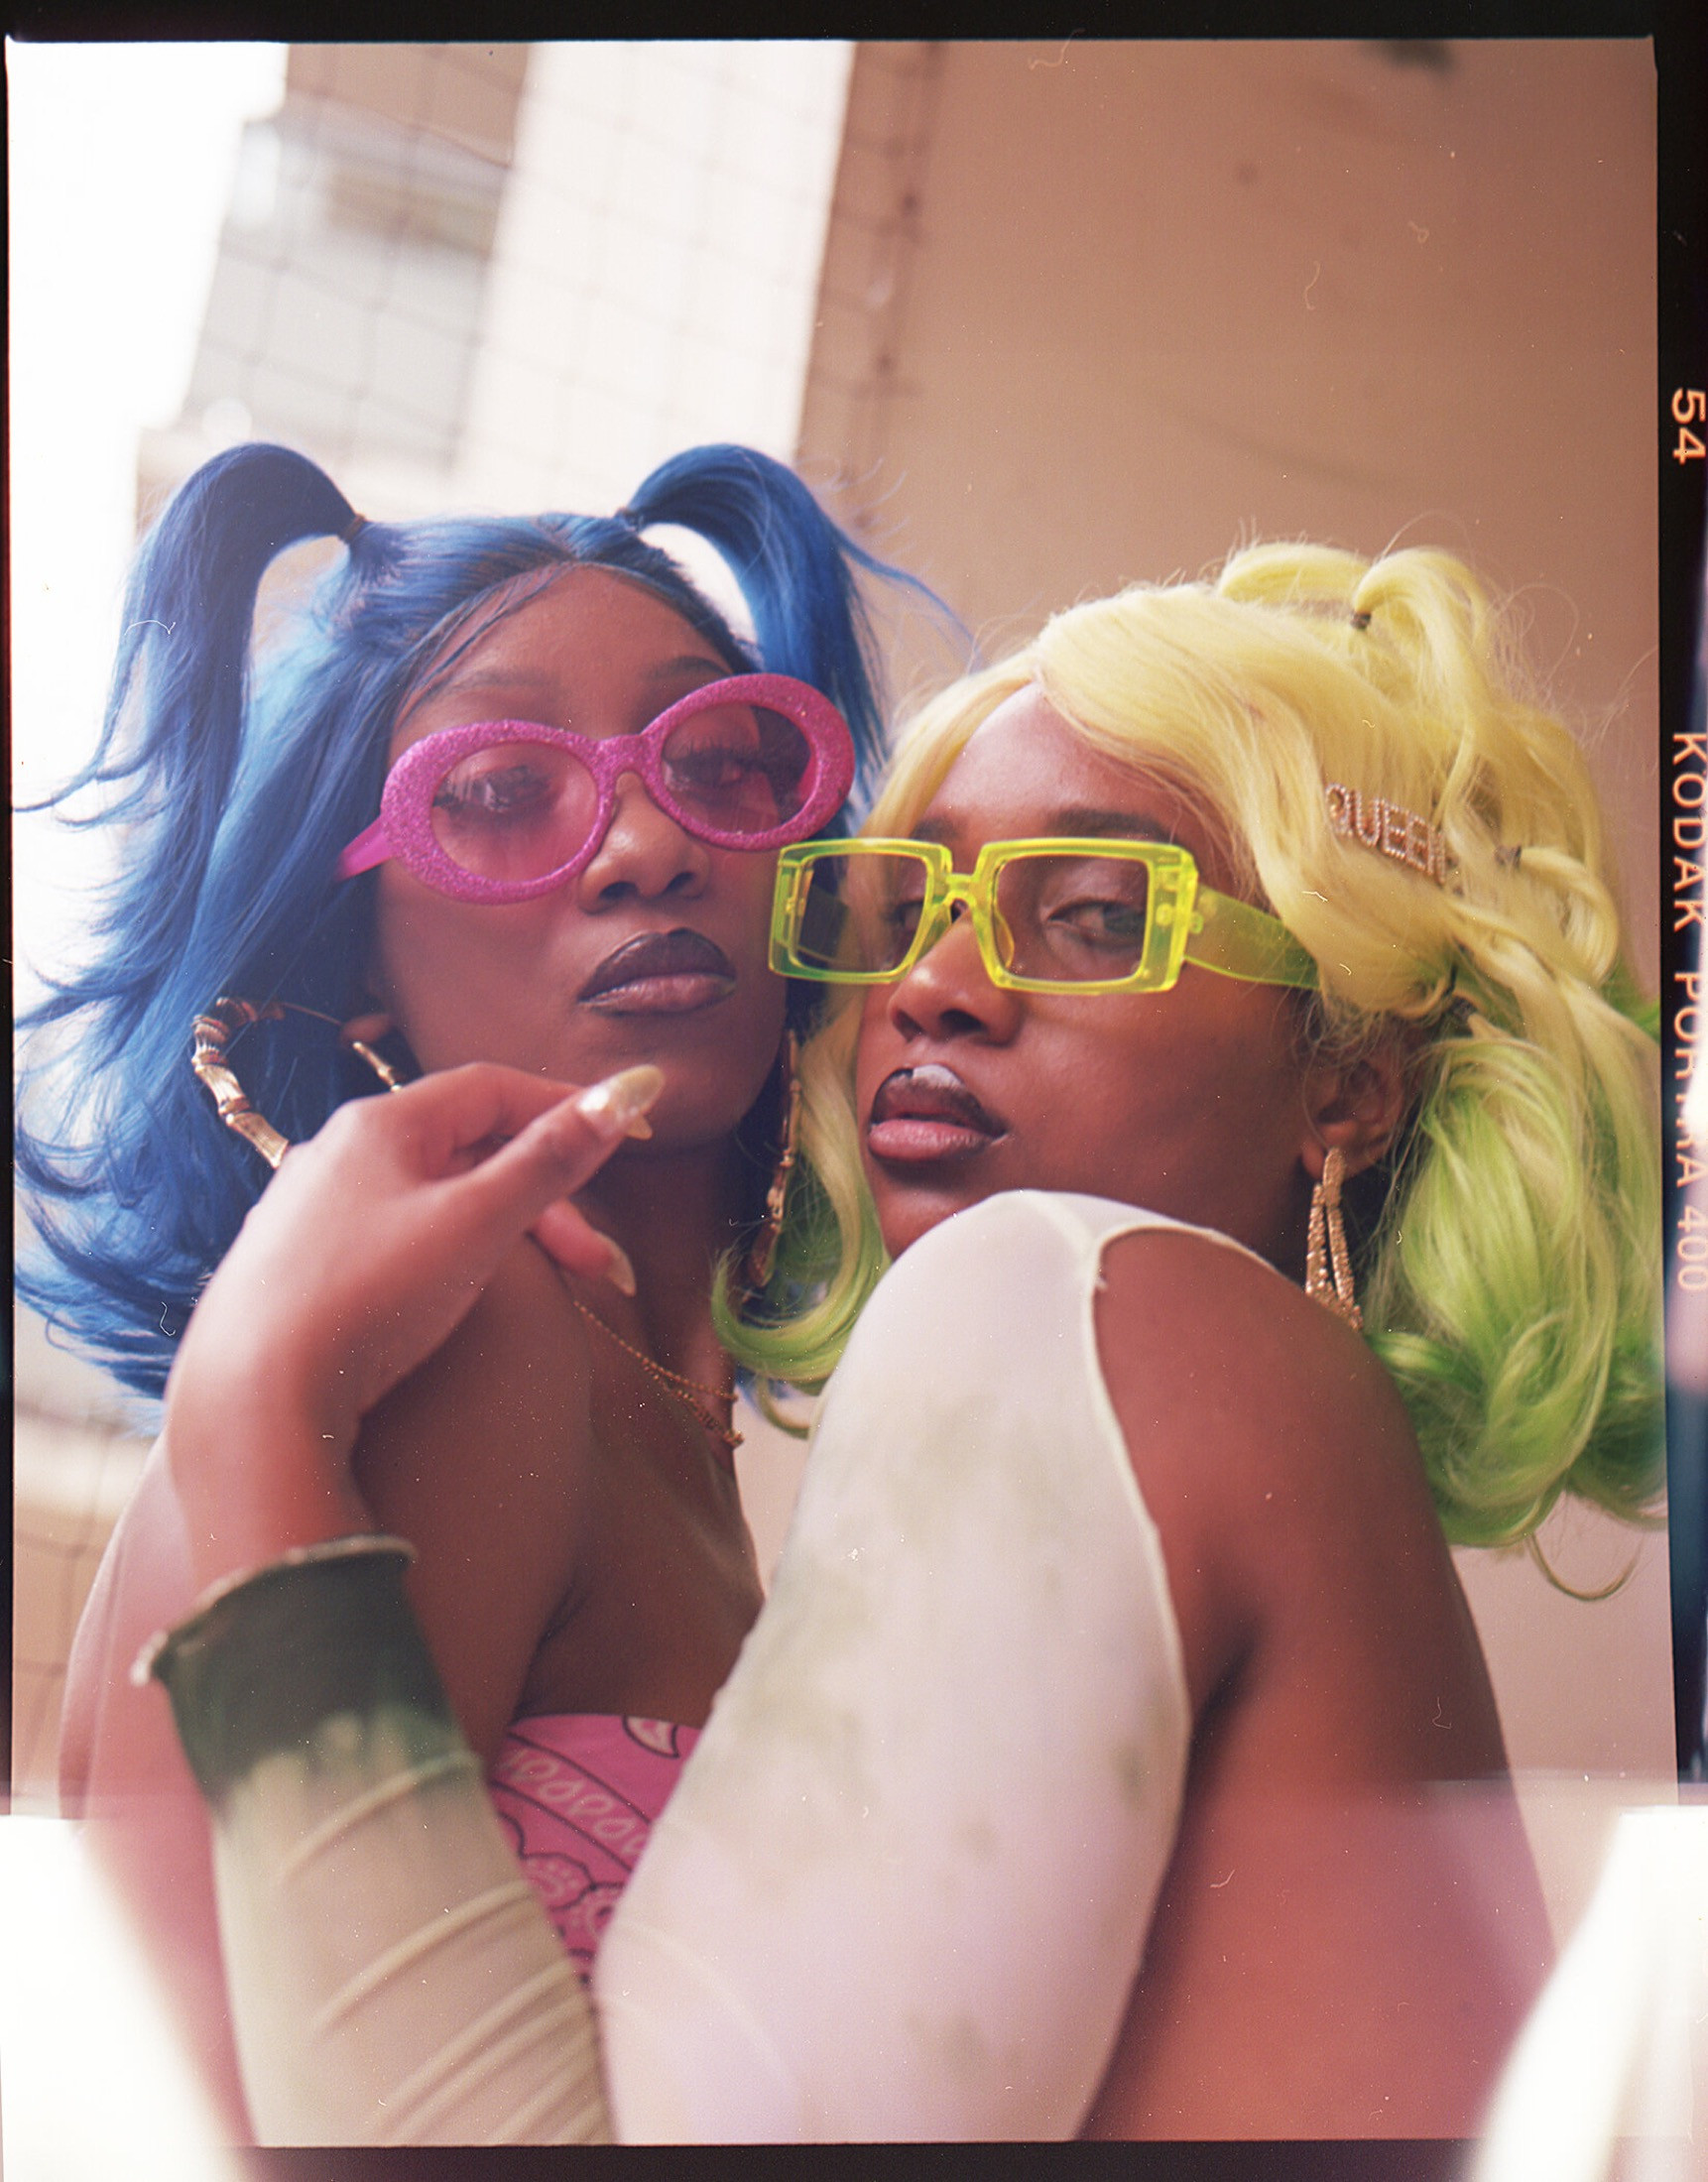 A close-up shot of two women (one wearing a pink top and pink sunglasses with blue hair; one wearing a cream shirt and neon yellow sunglasses with blond hair and green dip-dyed ends) hold each other and look down at the camera.